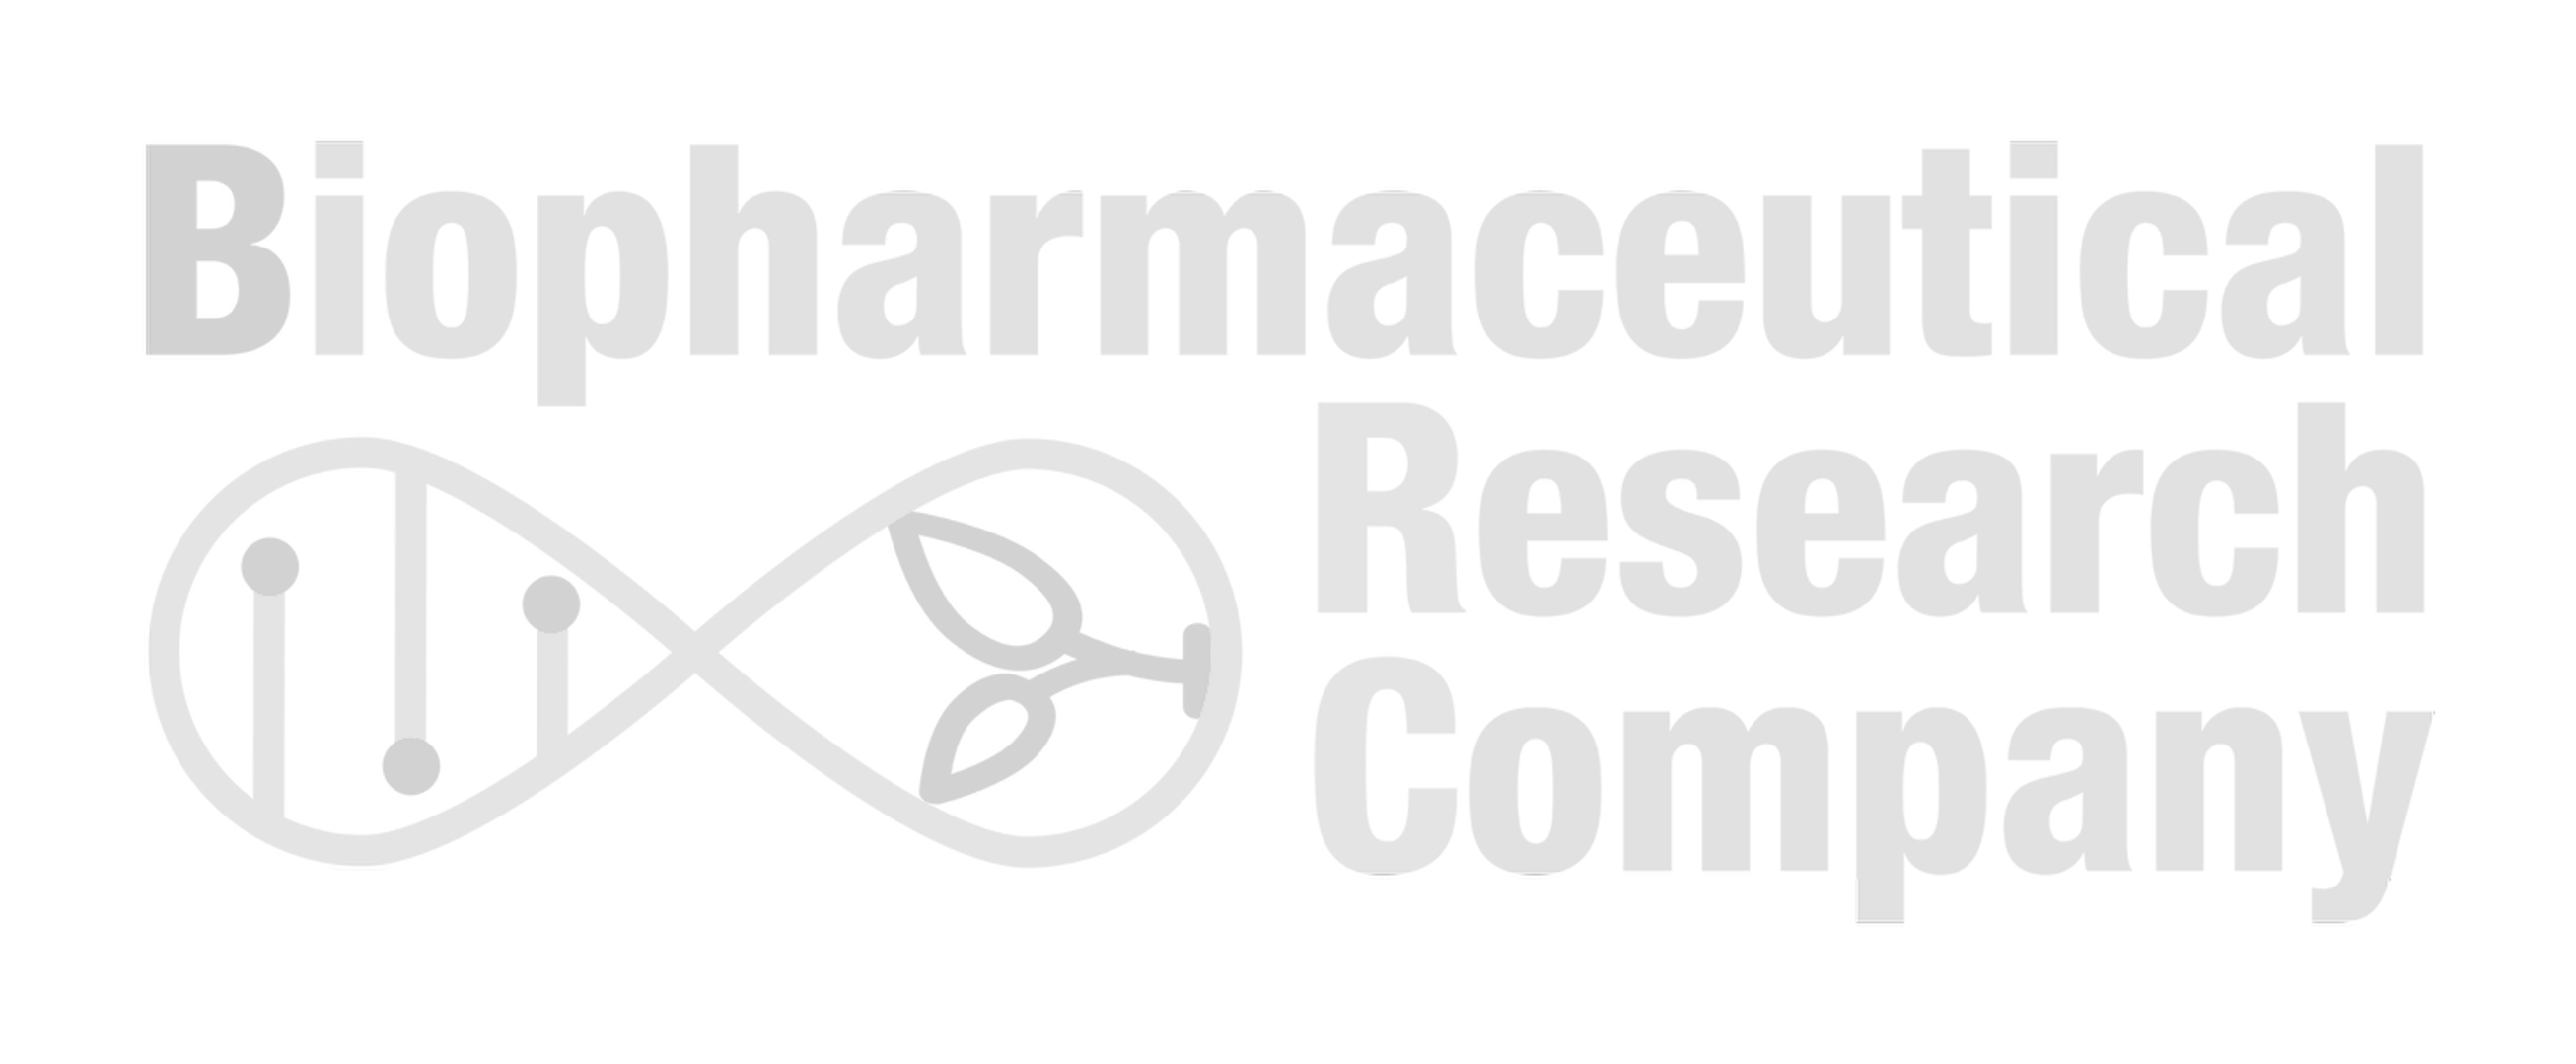 Biopharmaceutical Research Company